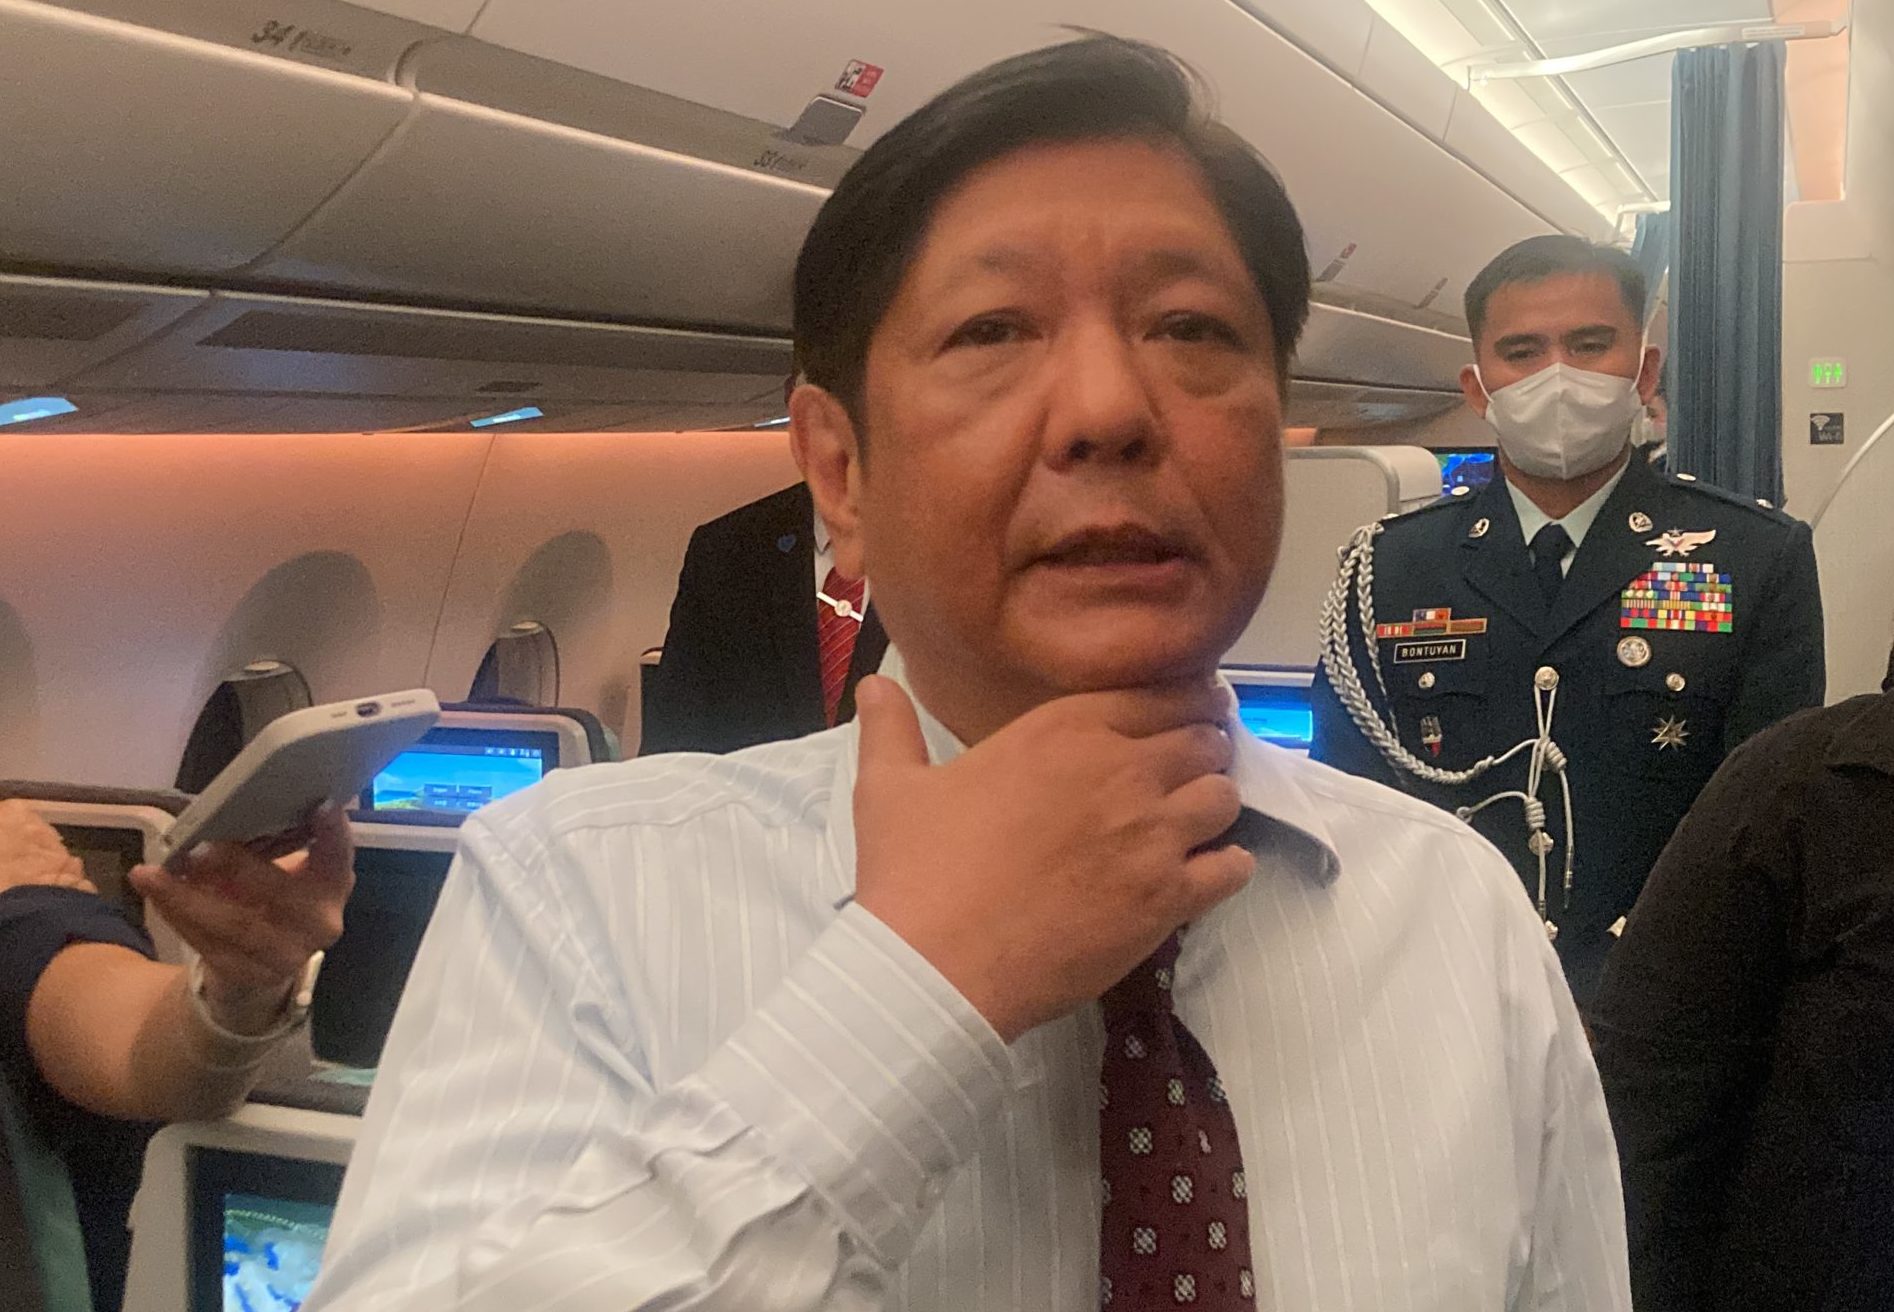 President Ferdinand Marcos Jr. speaks to reporters onboard PR001 enroute to Belgium to attend the Association of Southeast Asian Nations-European Union (Asean-EU) Commemorative Summit in Brussels. Photo by Nestor Corrales